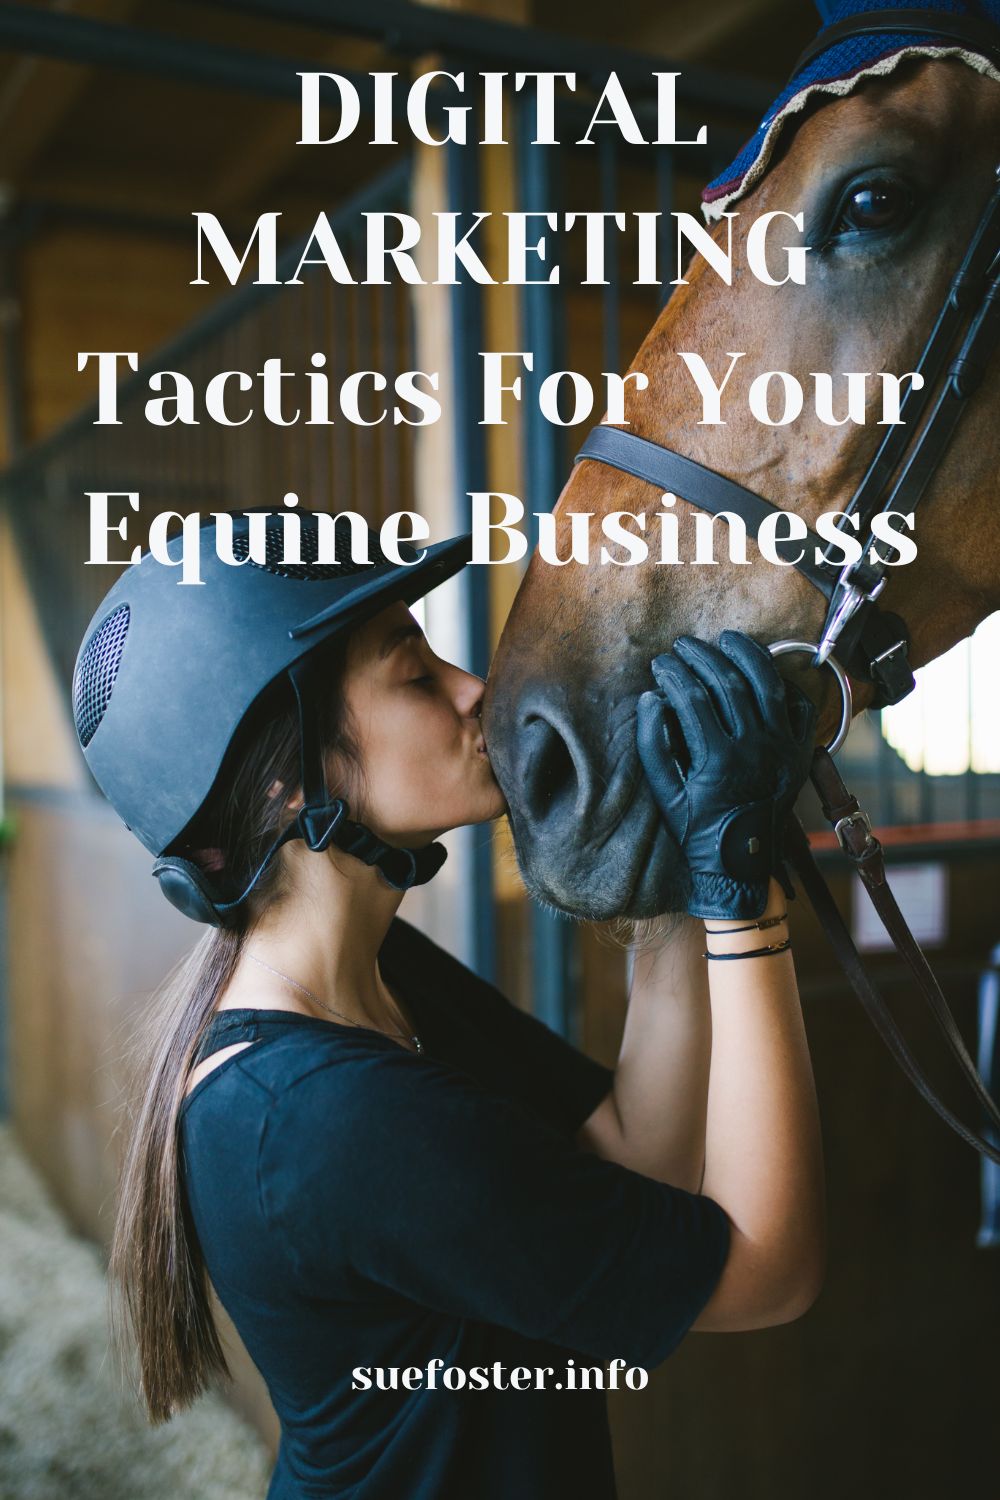 Digital marketing strategies that are most suitable and effective for equine businesses